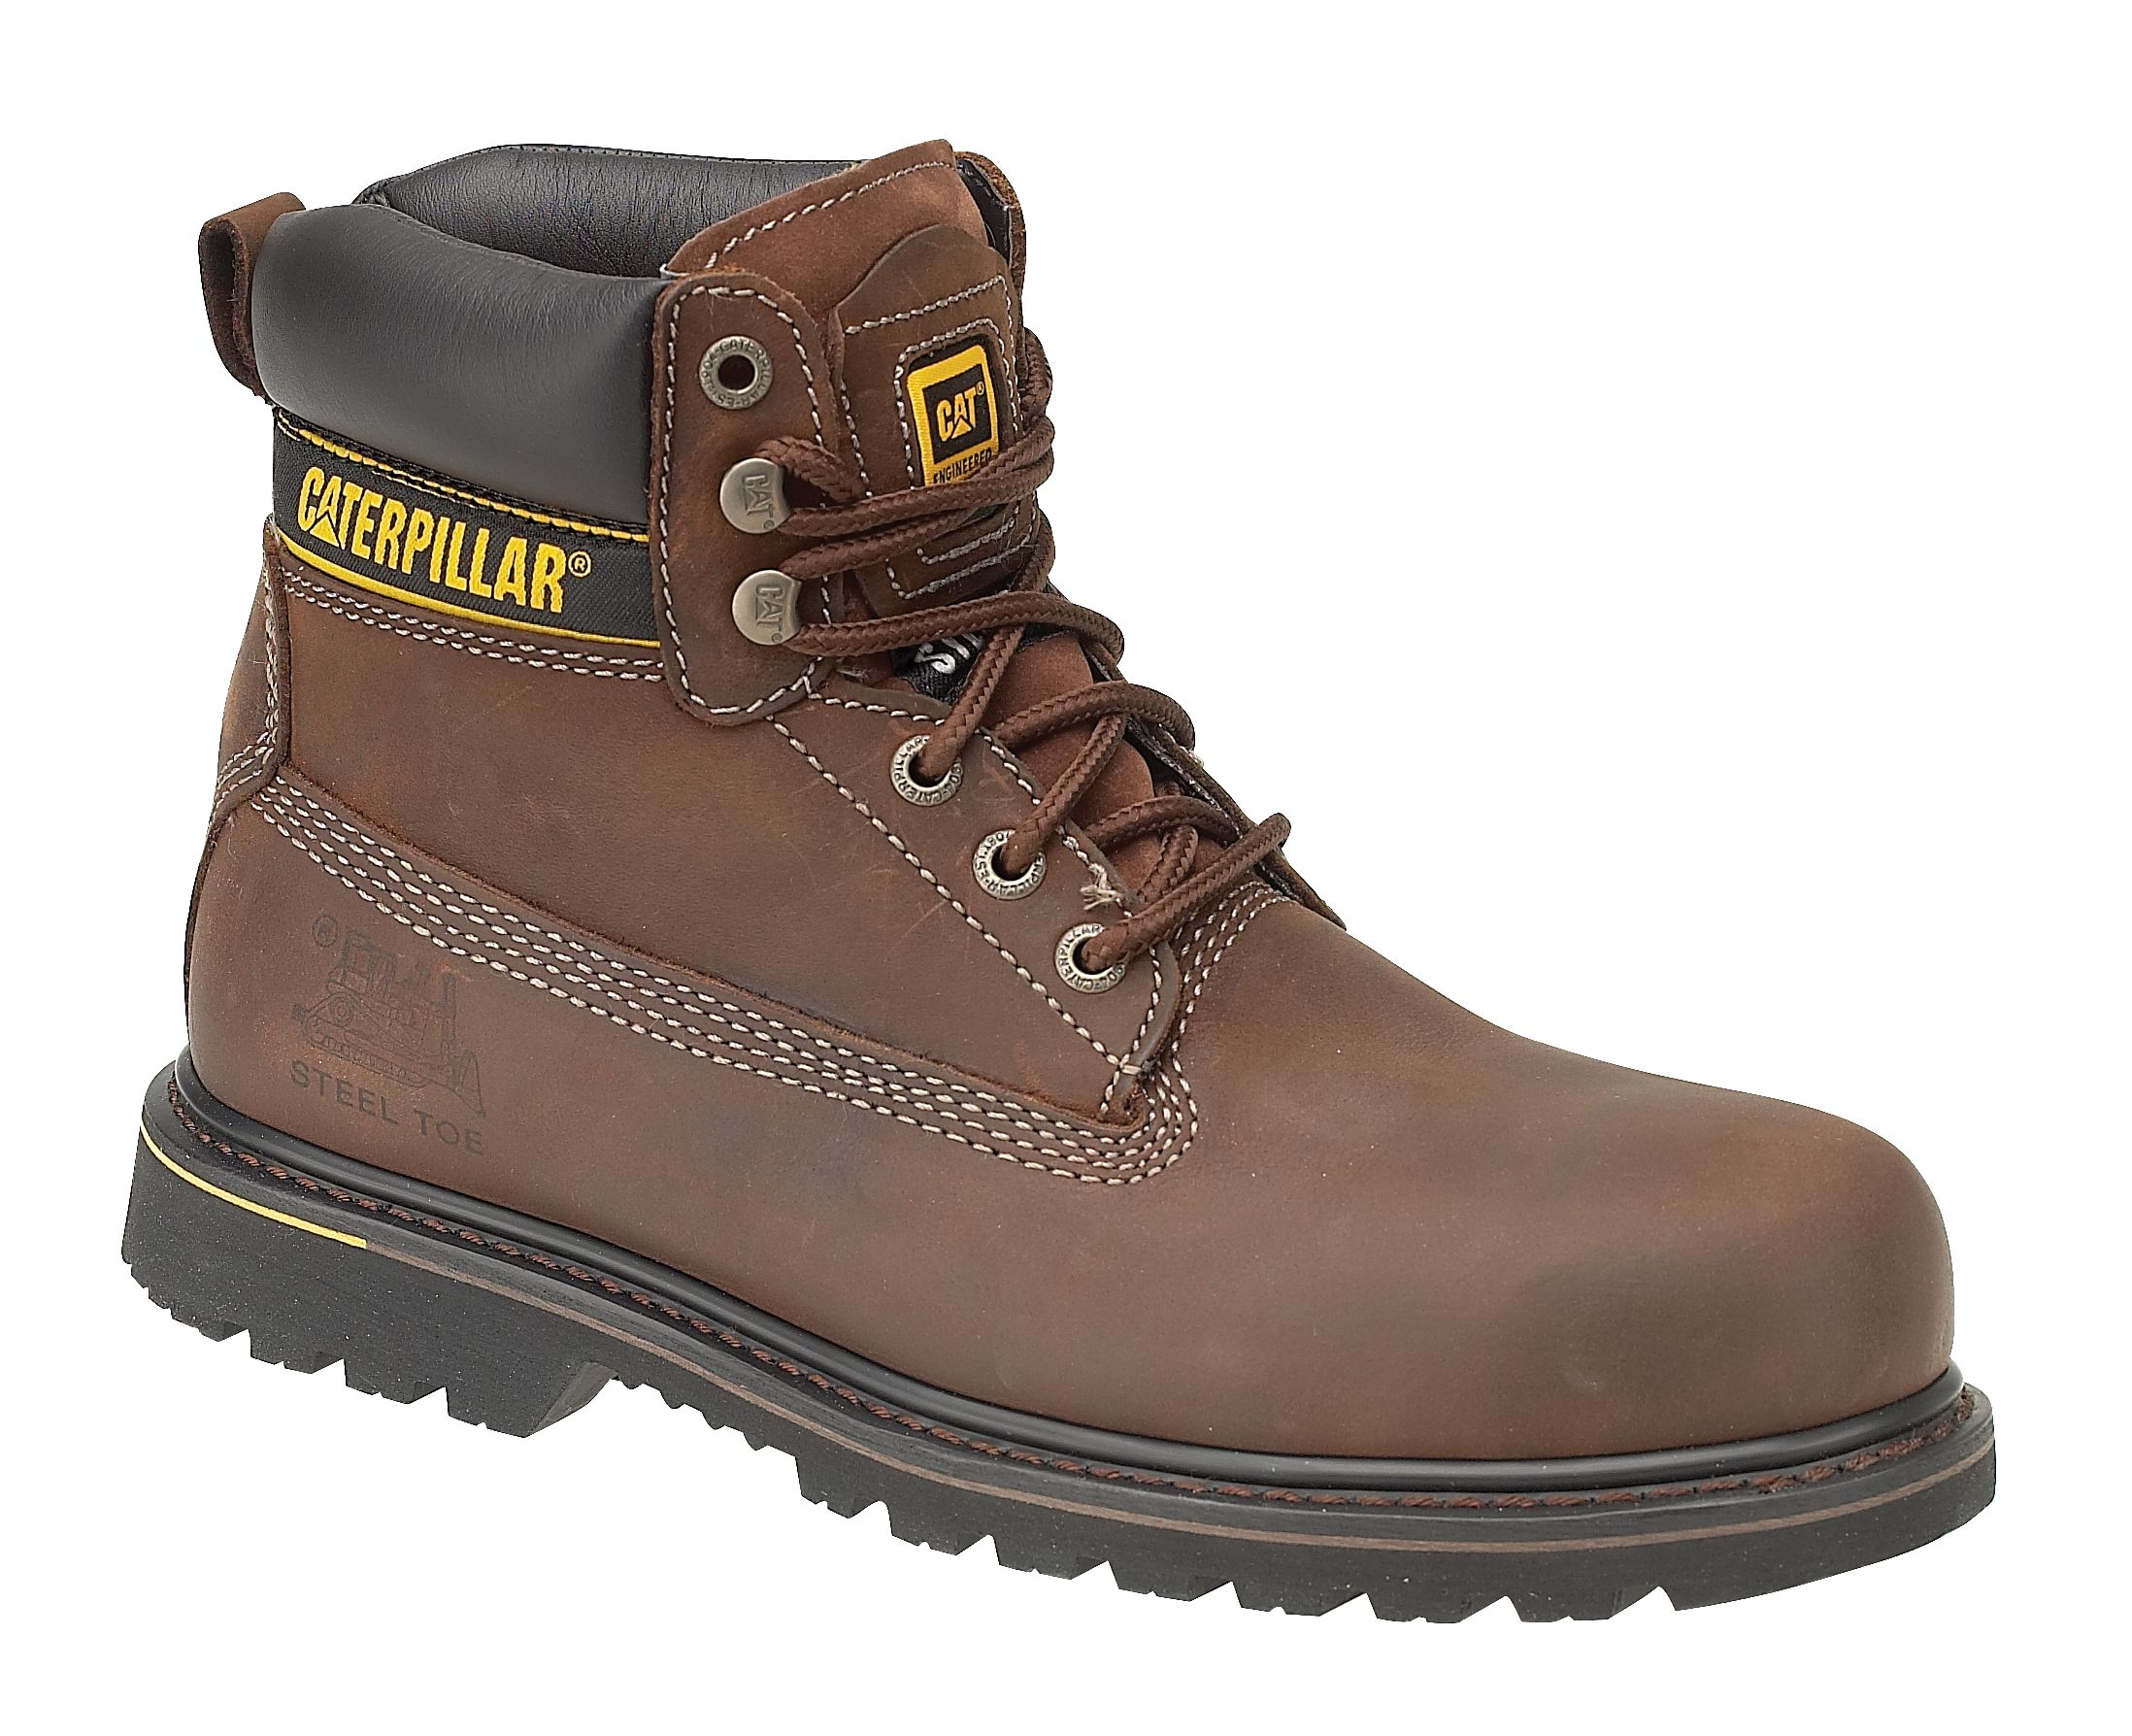 Image of Caterpillar CAT Holton SB Safety Boot - Brown Size 11